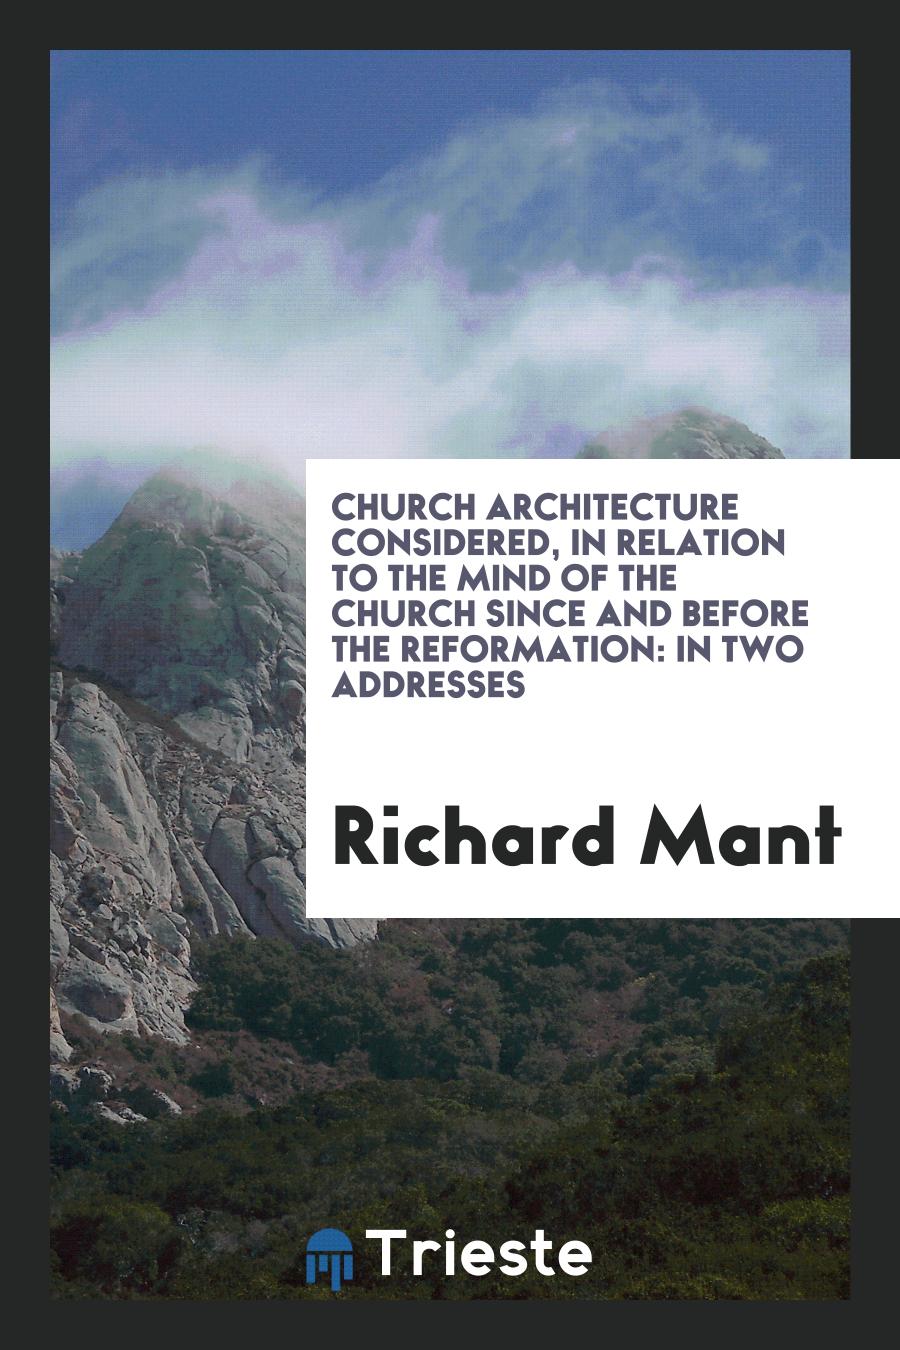 Church Architecture Considered, in Relation to the Mind of the Church Since and Before the Reformation: In Two Addresses